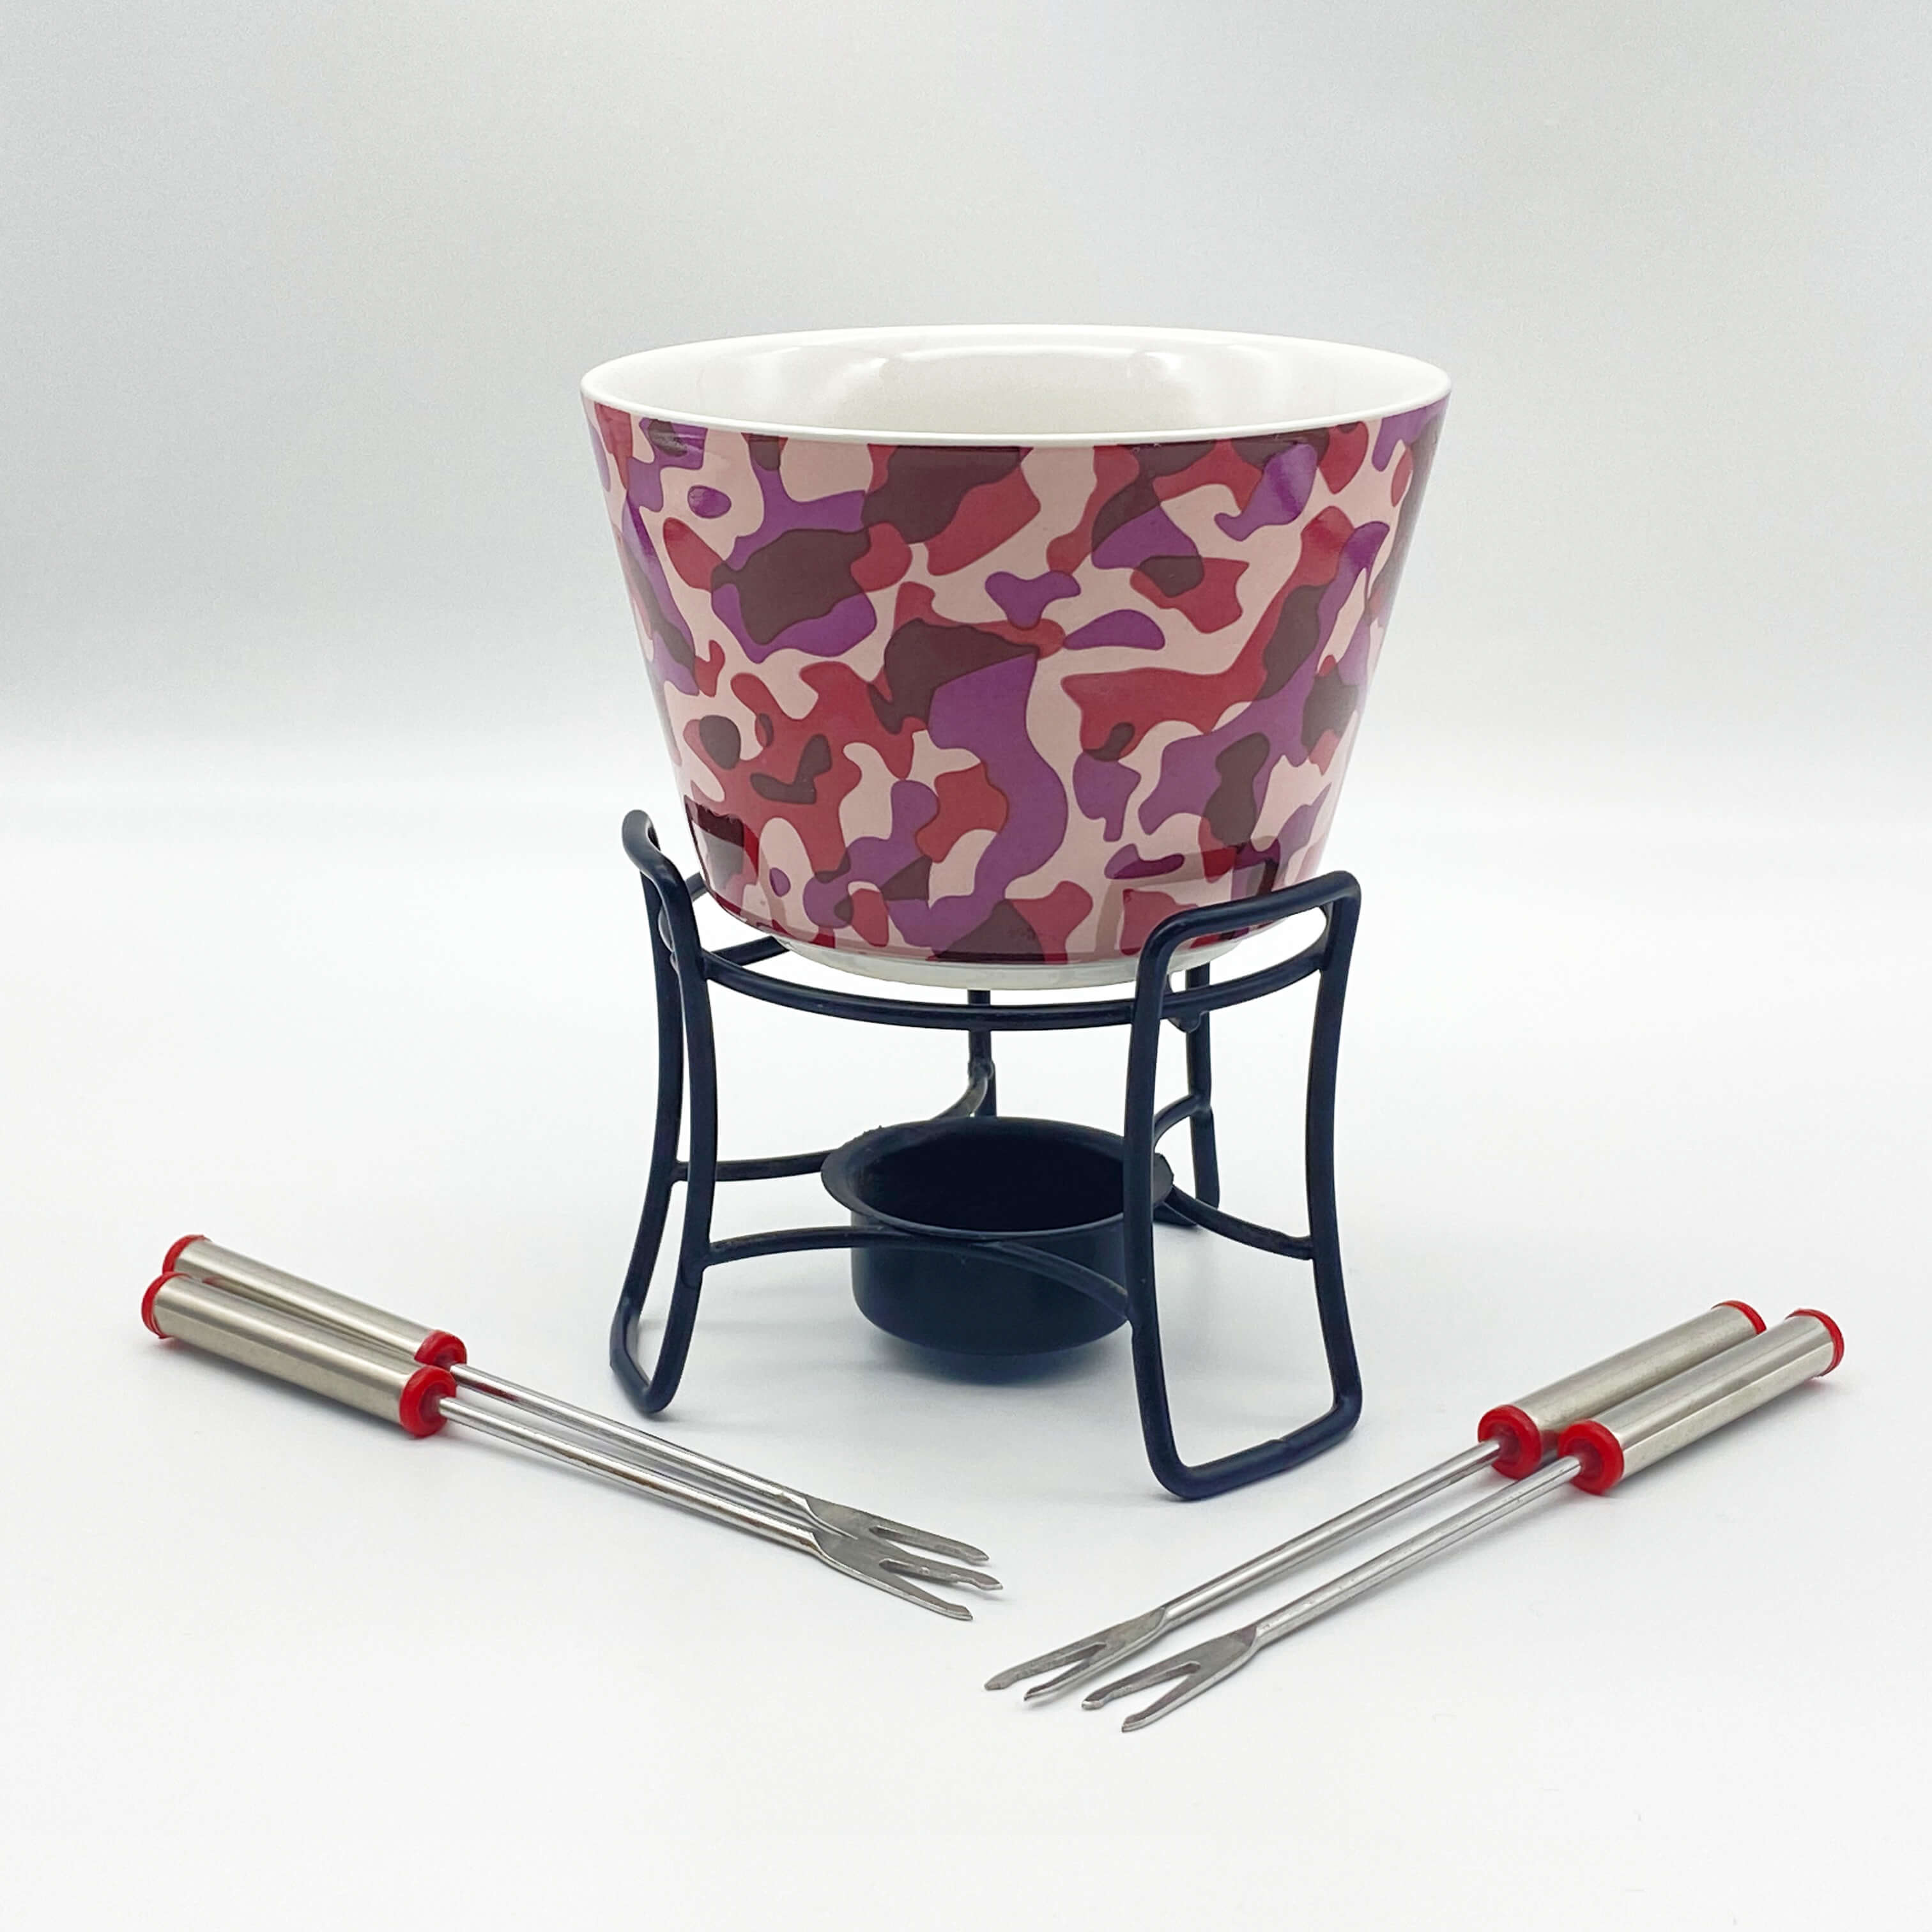 Chocolate Fondue Set Straight Bowl with 4 forks